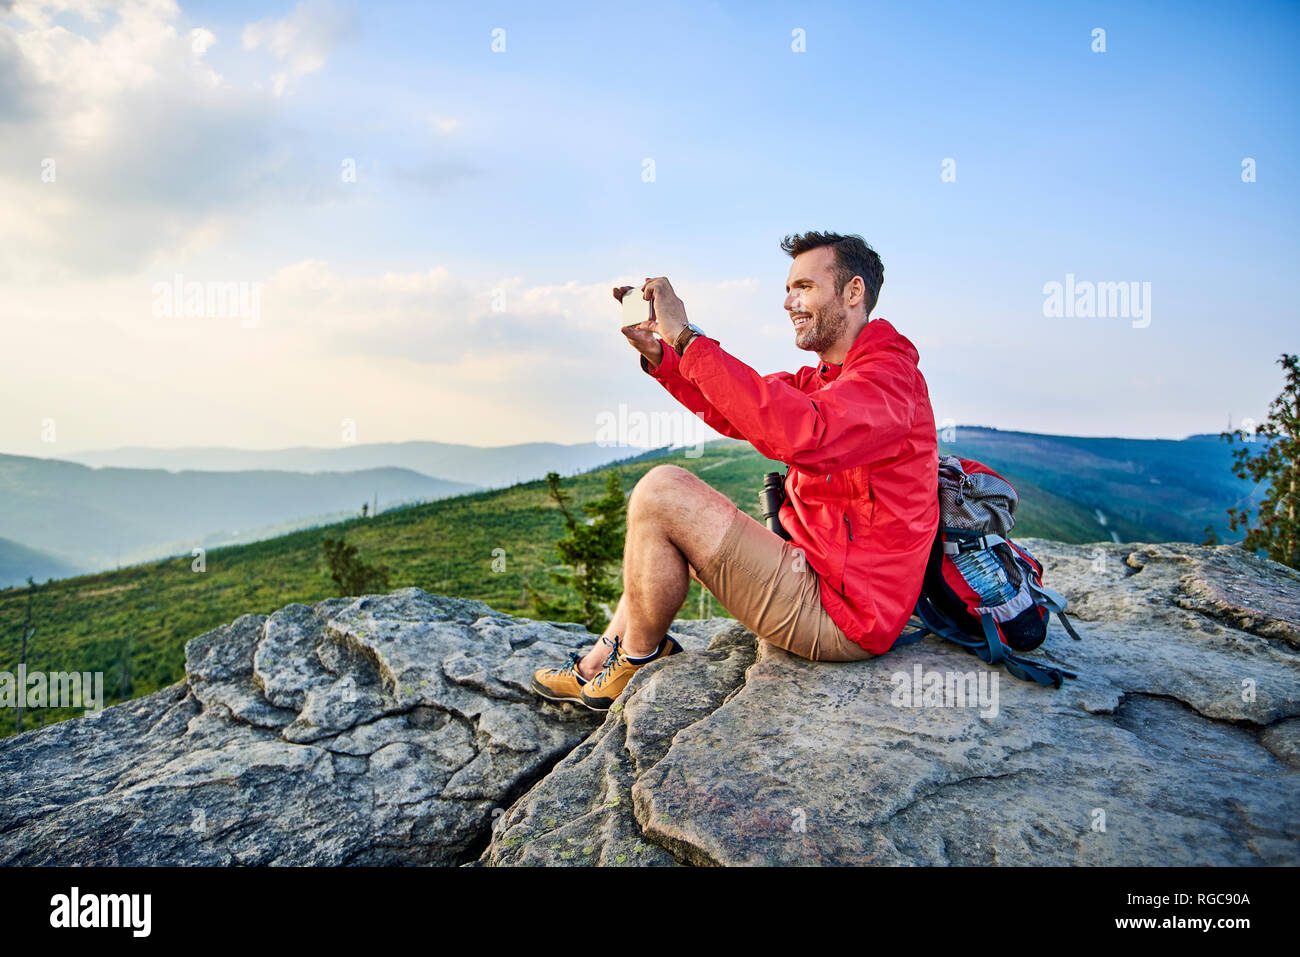 Man sitting on rock taking picture with his cell phone during hiking trip in the mountains Stock Photo